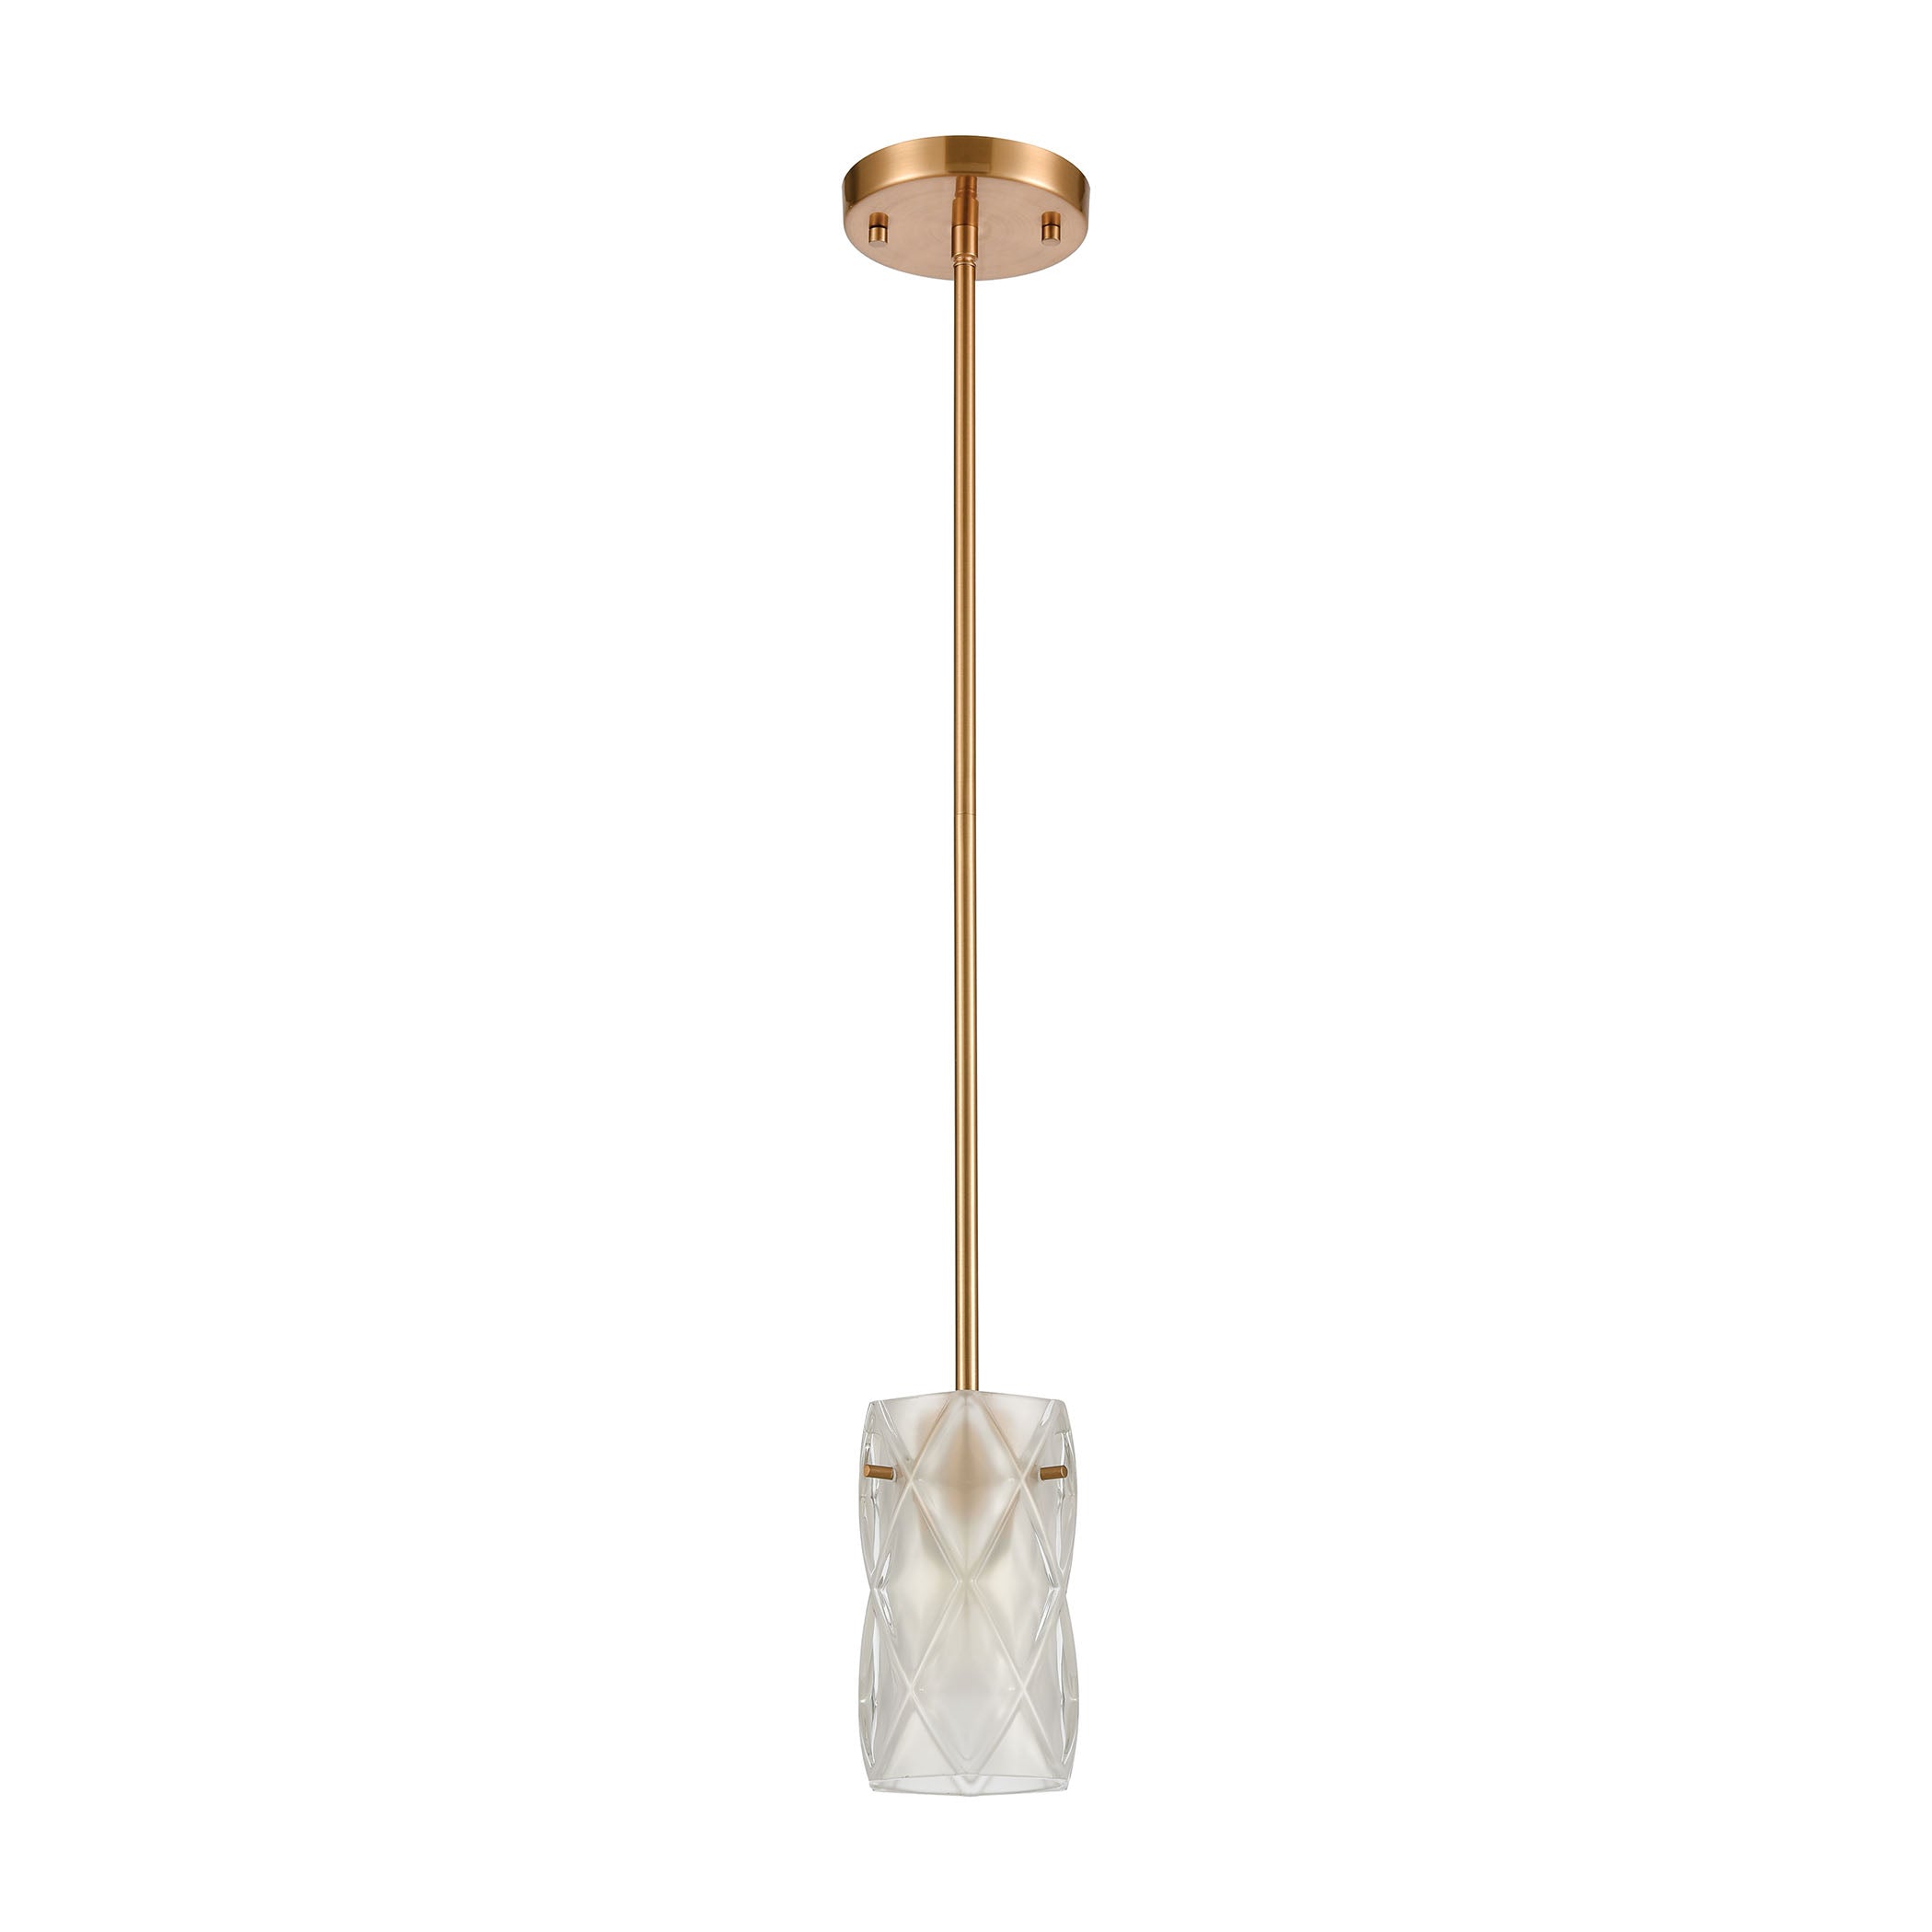 ELK Lighting 12284/1 Jenning 1-Light Mini Pendant in Satin Brass with Frosted Crystal